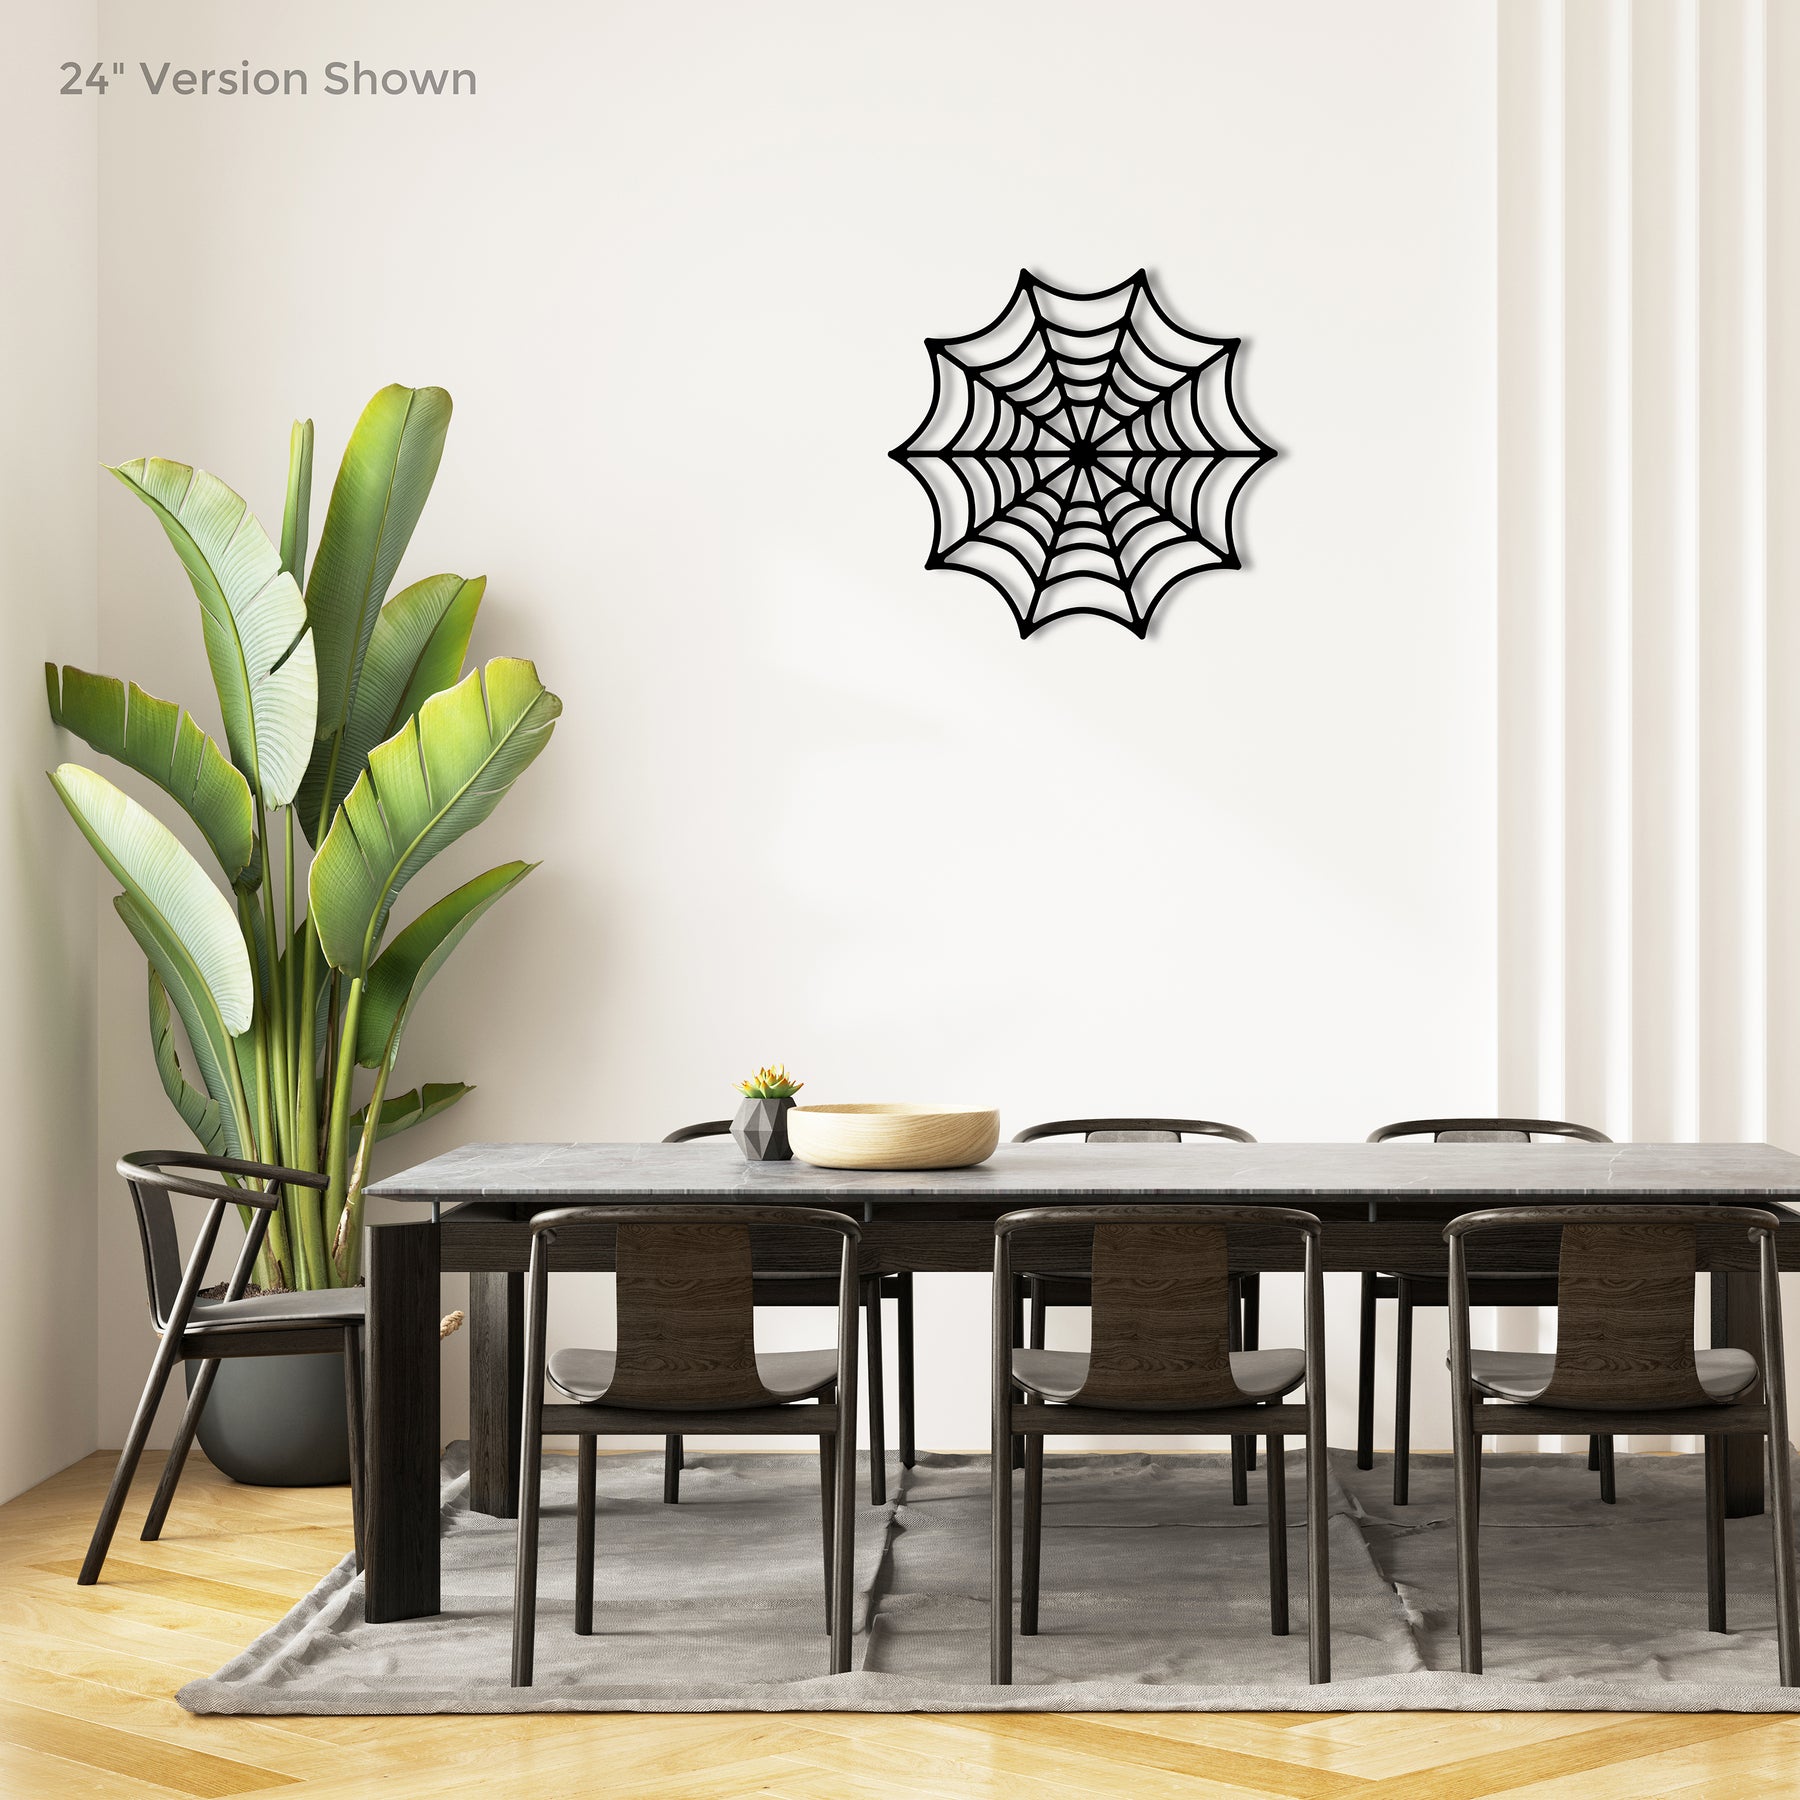 Spider Web with spider wall art spiderweb wall decor 2d art